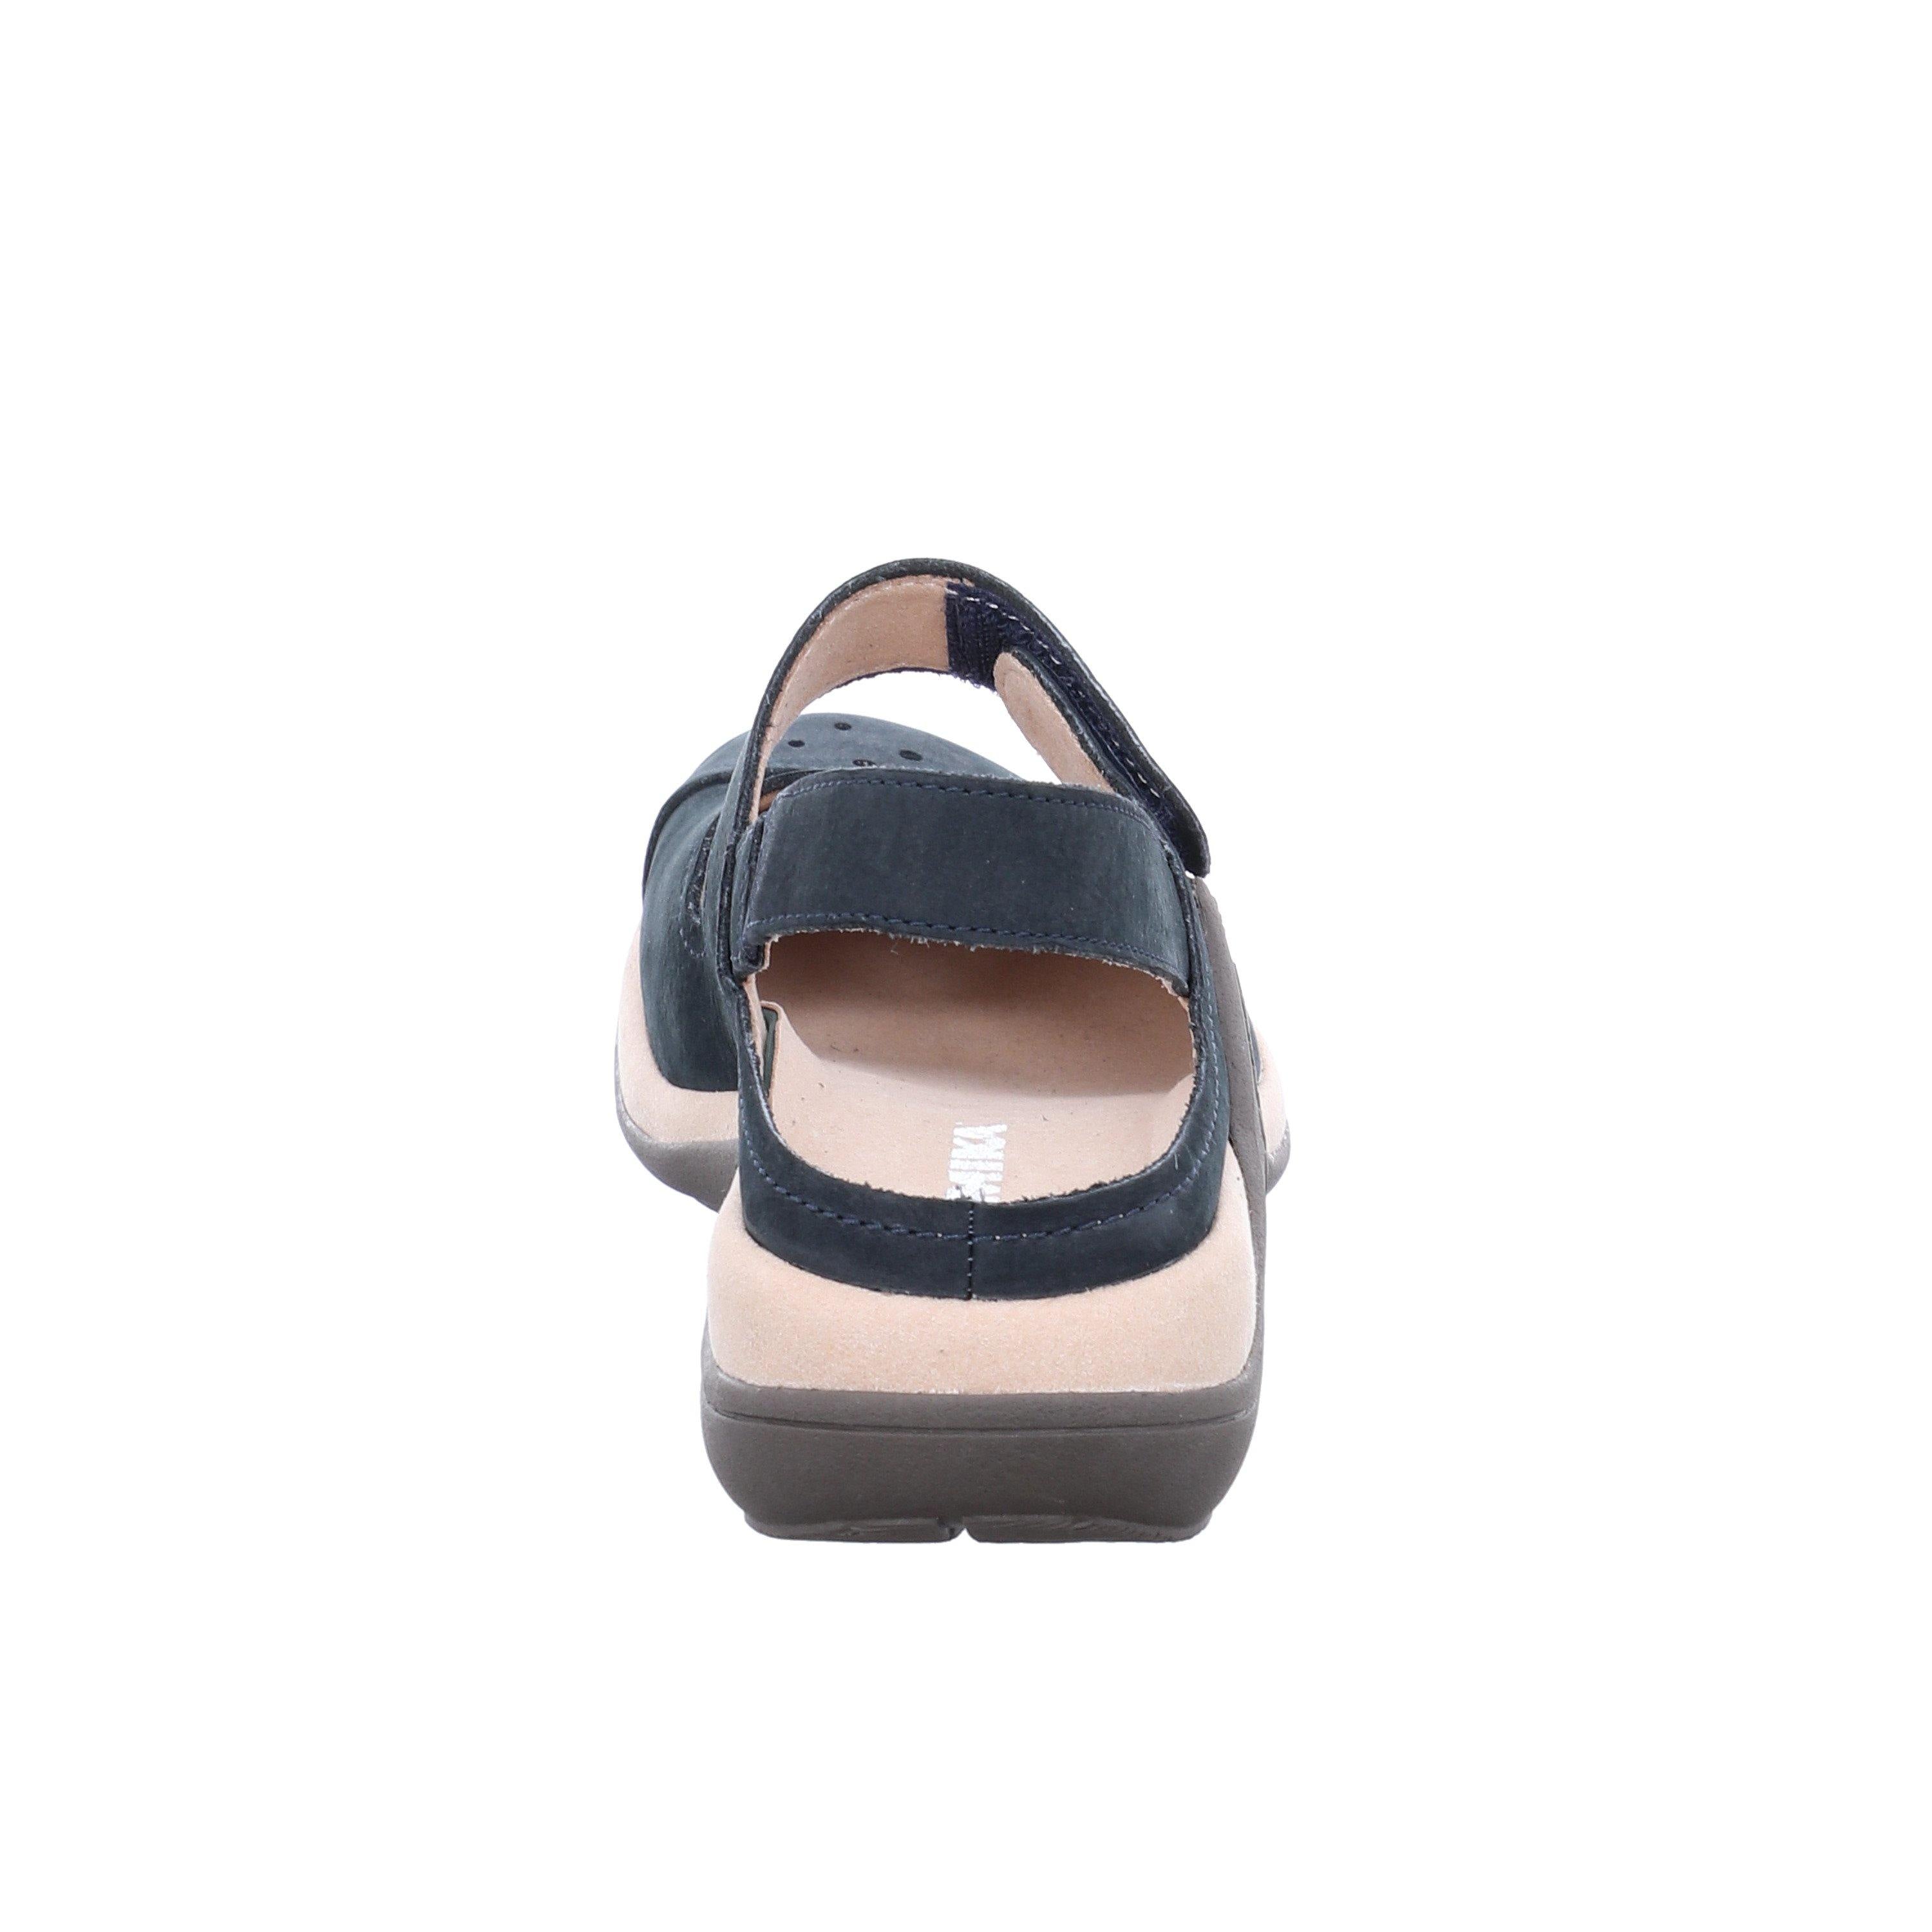 Clog style MILLA 133 by Romika USA